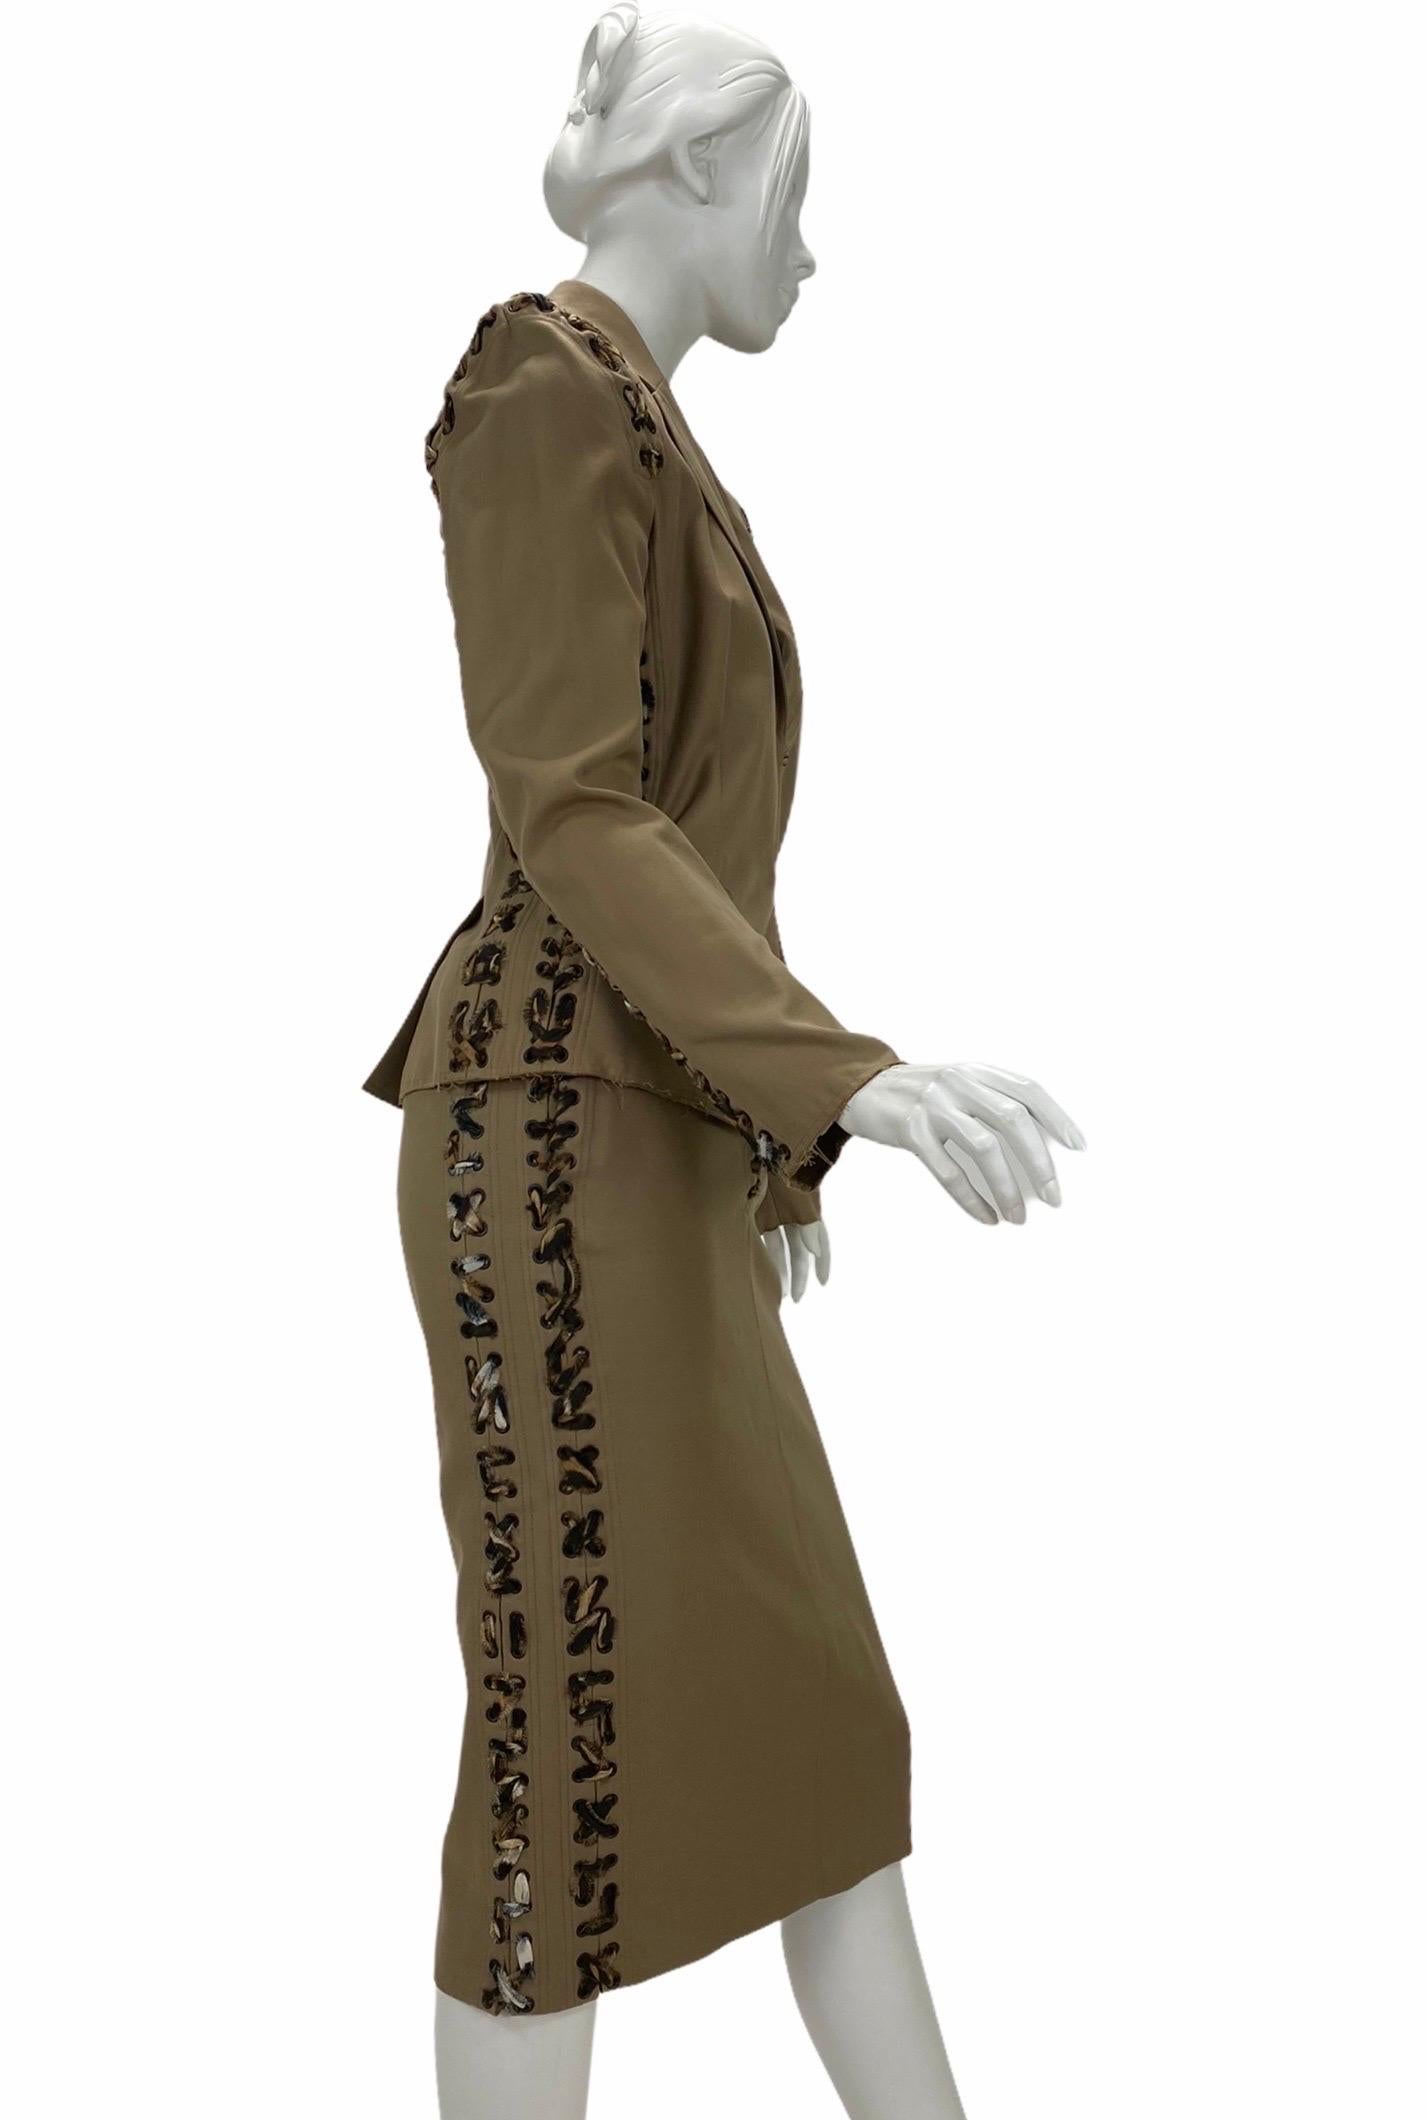 Tom Ford for Yves Saint Laurent Safari Skirt Suit
S/S 2002 Runway Collection
Fr. Size 36 - US 4
The tailored jacket is made of khaki cotton and features a sharp cut with sculpted, padded shoulders, front pockets, raw edges, a hook and eye closure at